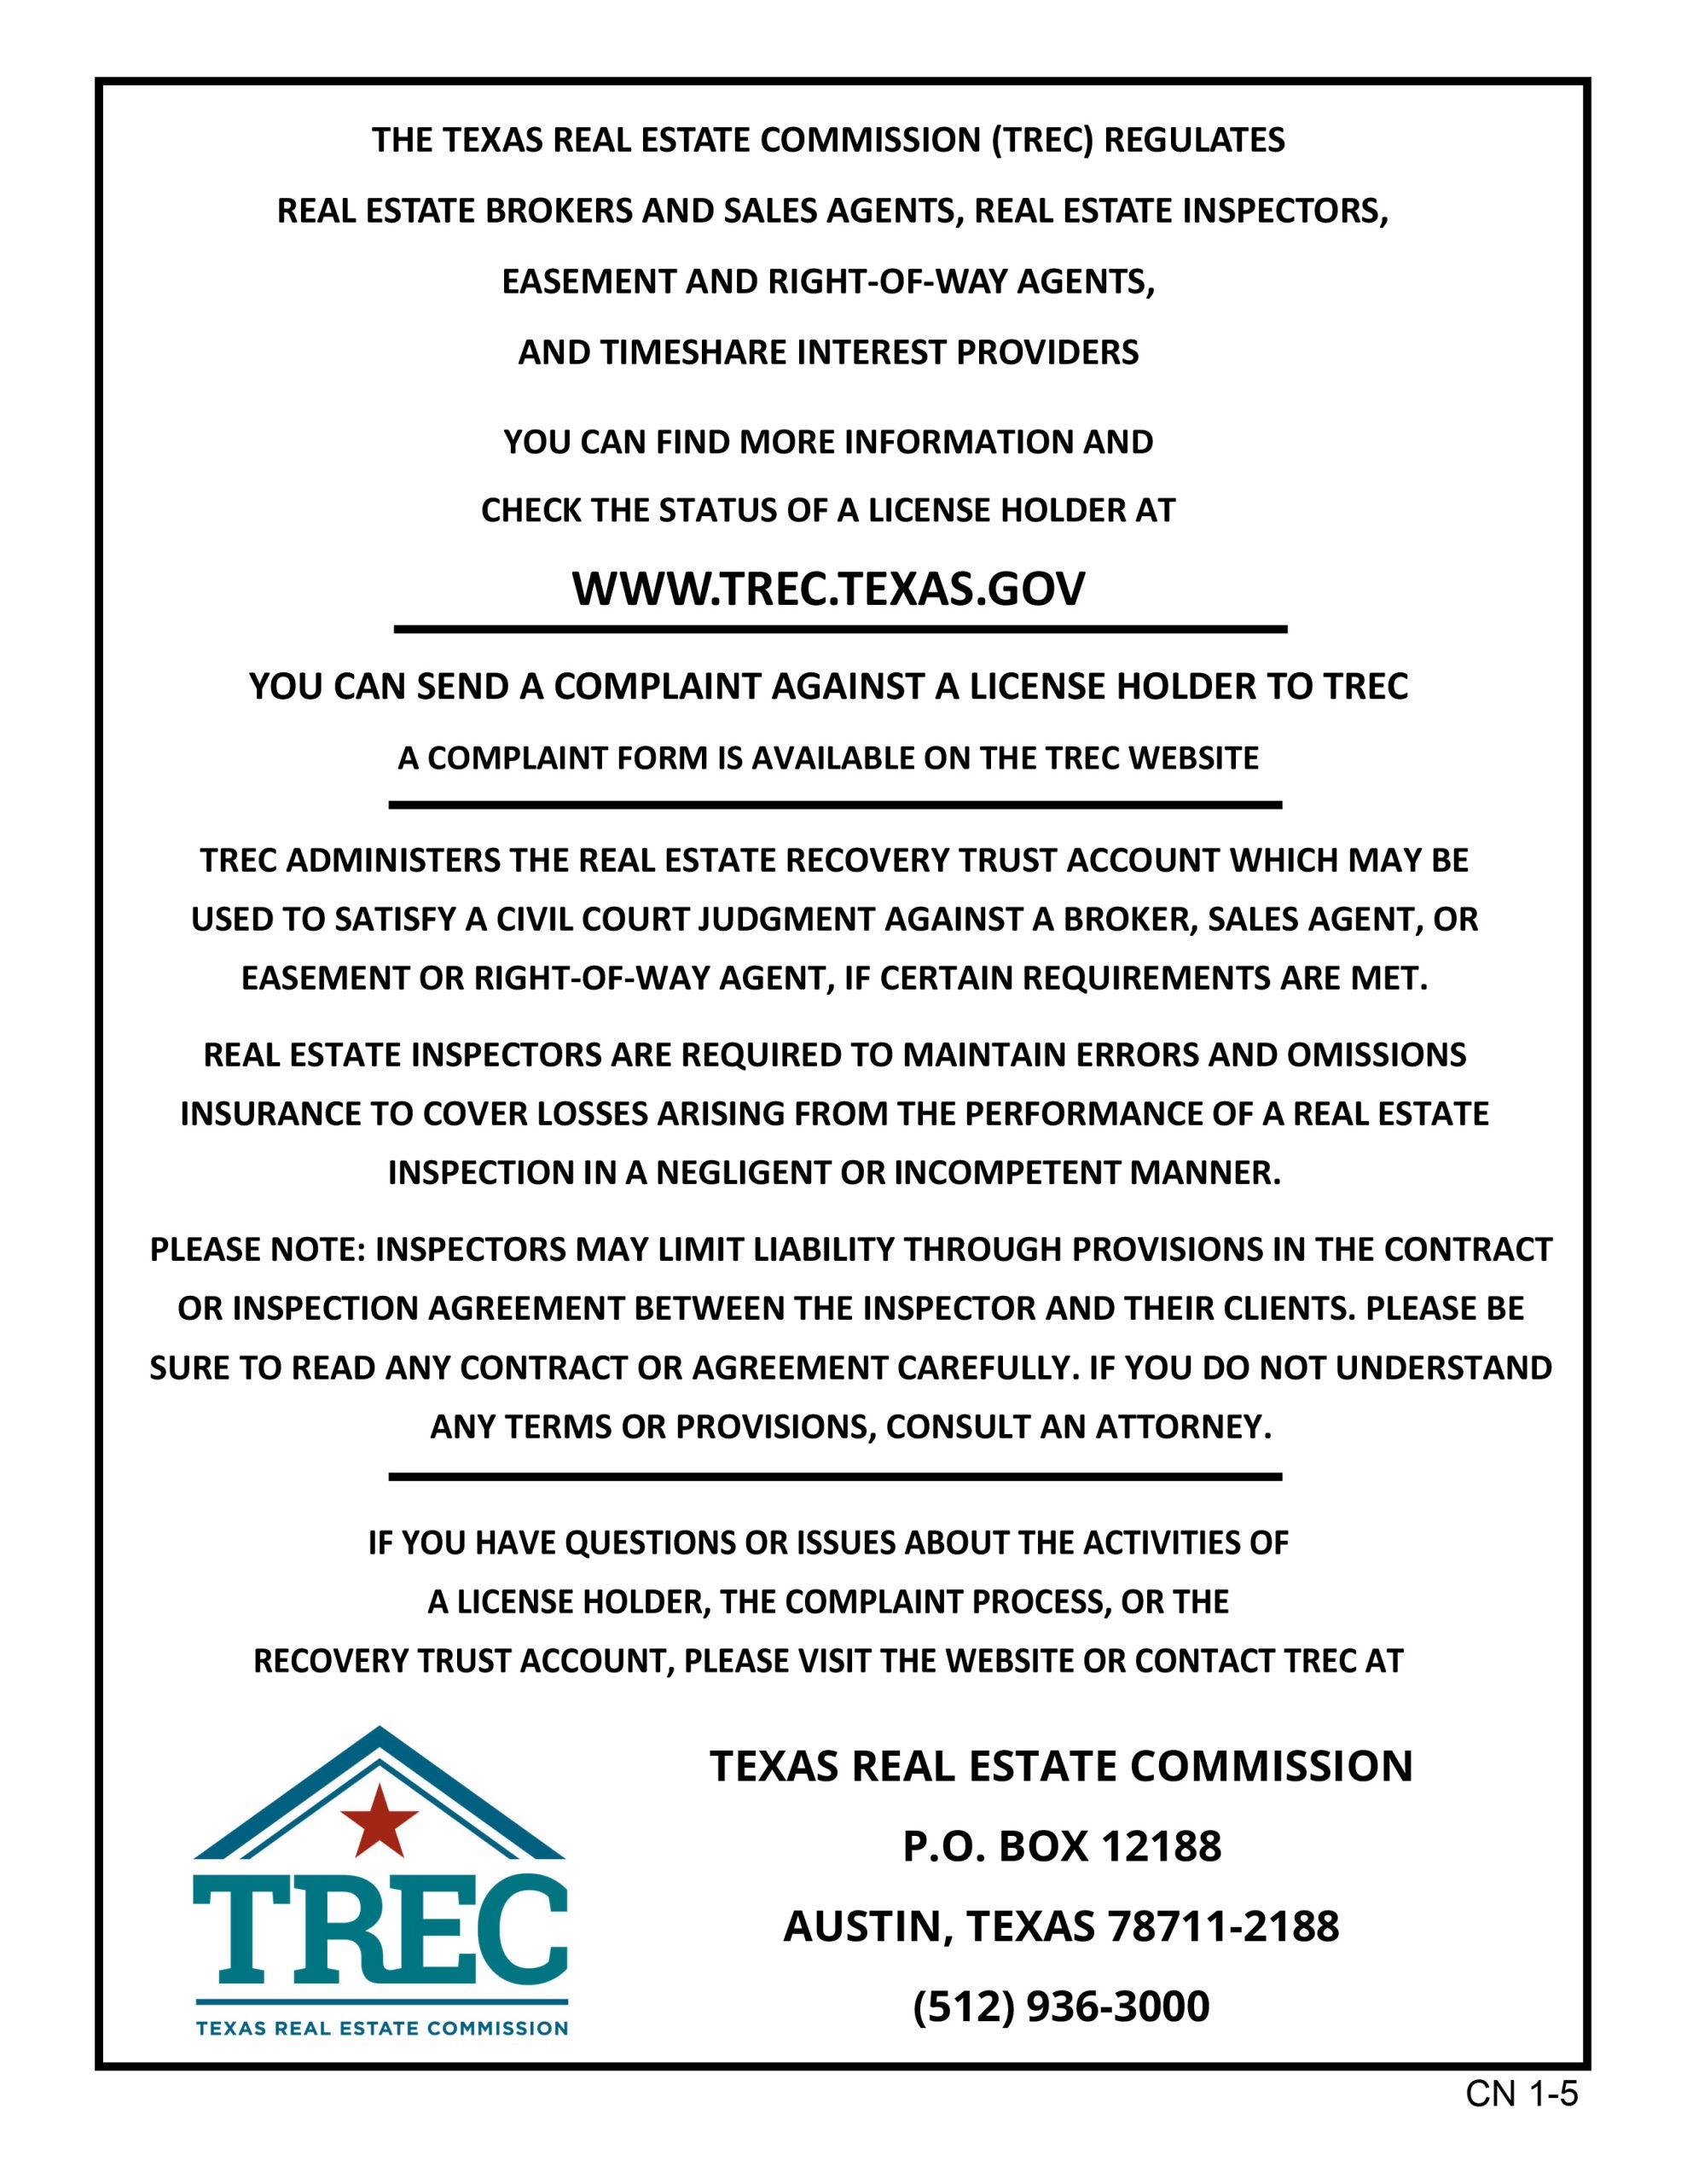 Texas Real Estate Commission Consumer Protection Notice CN 1-5